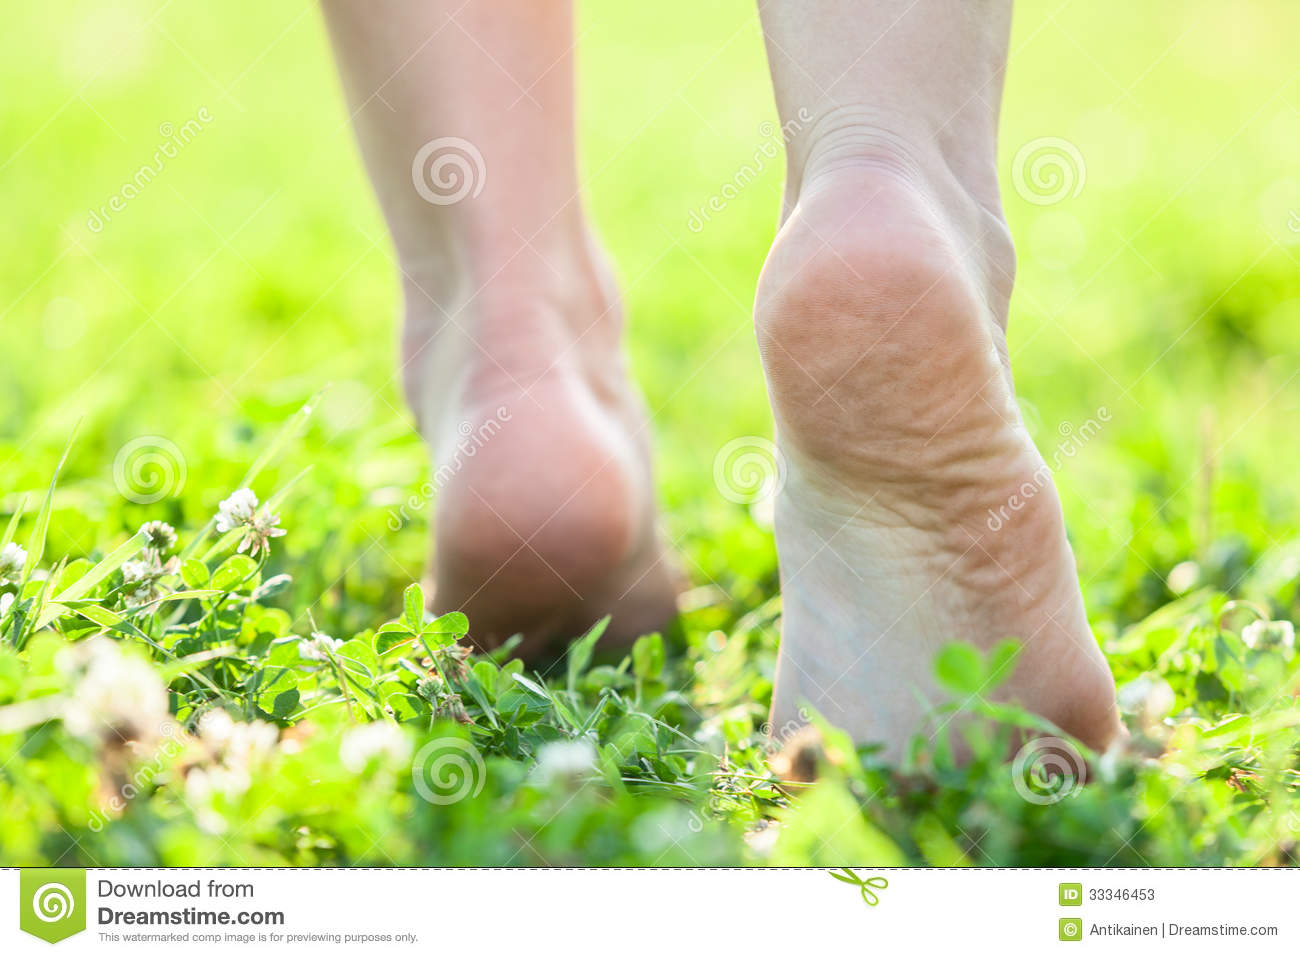 Bare Feet On The Soft Summer Grass Stock Photos   Image  33346453